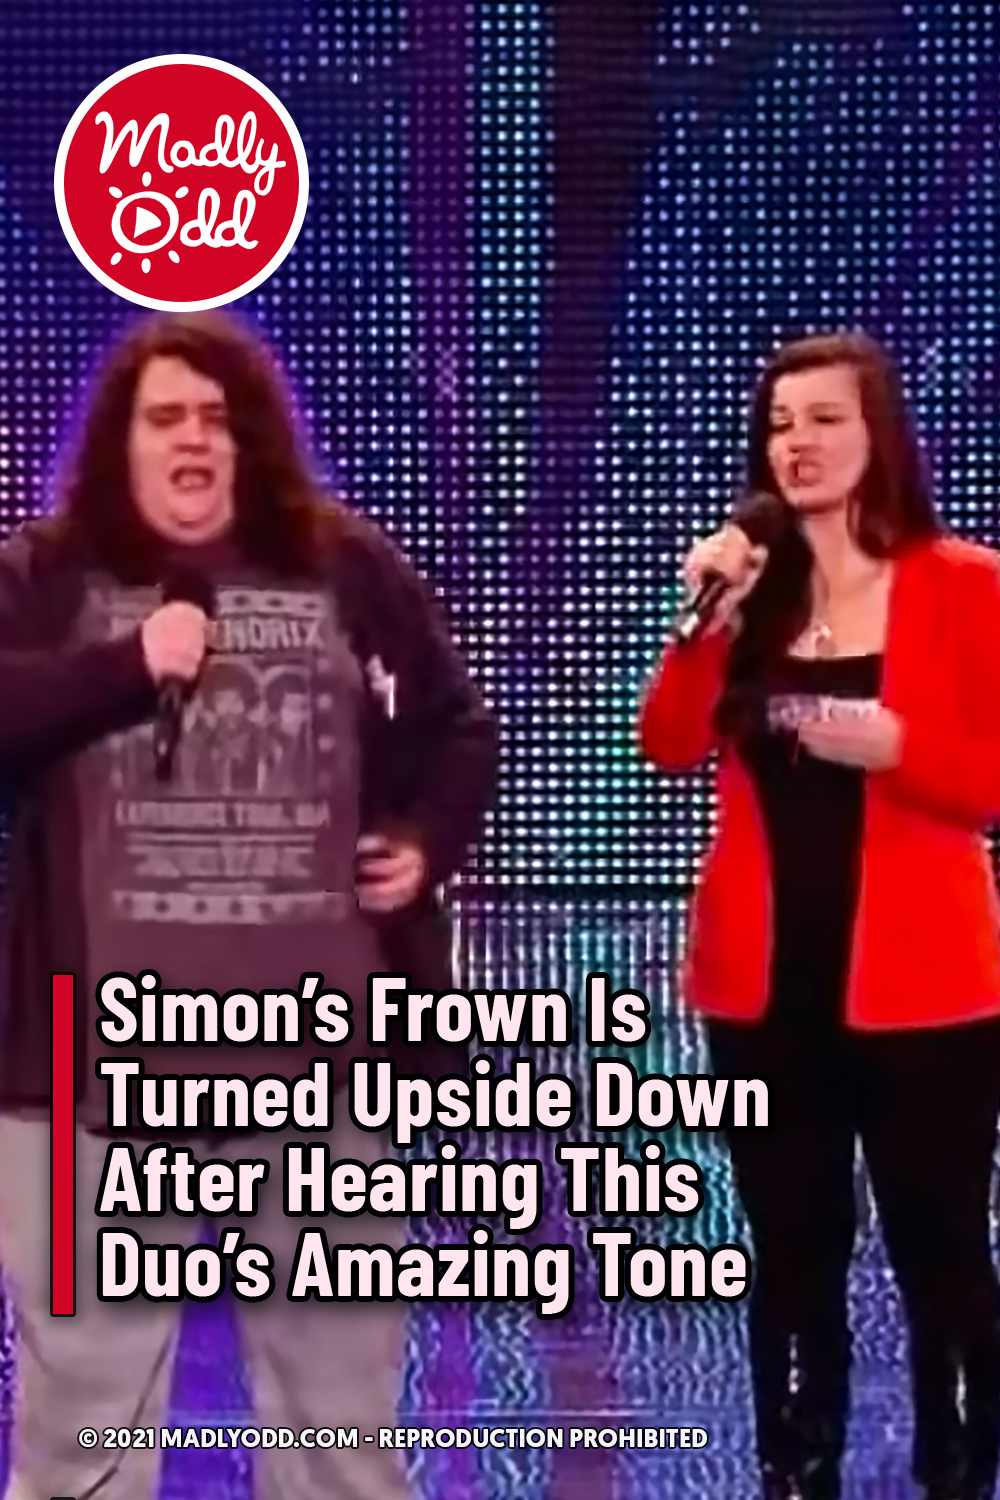 Simon’s Frown Is Turned Upside Down After Hearing This Duo’s Amazing Tone